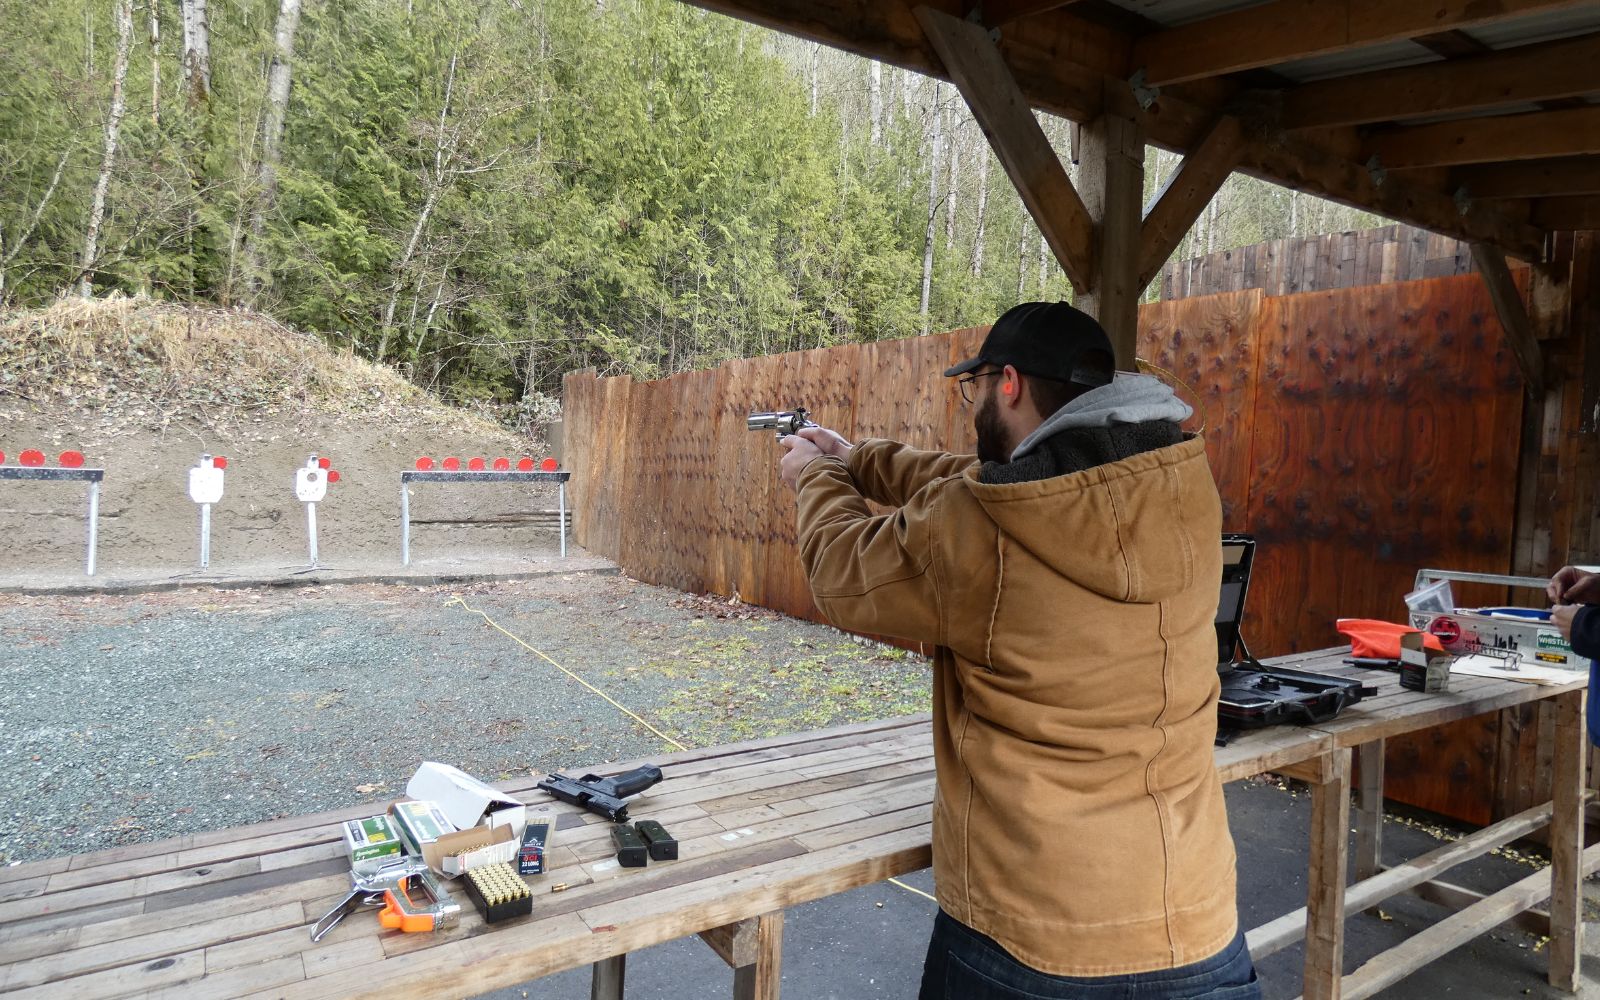 Professional Names for Shooting Ranges